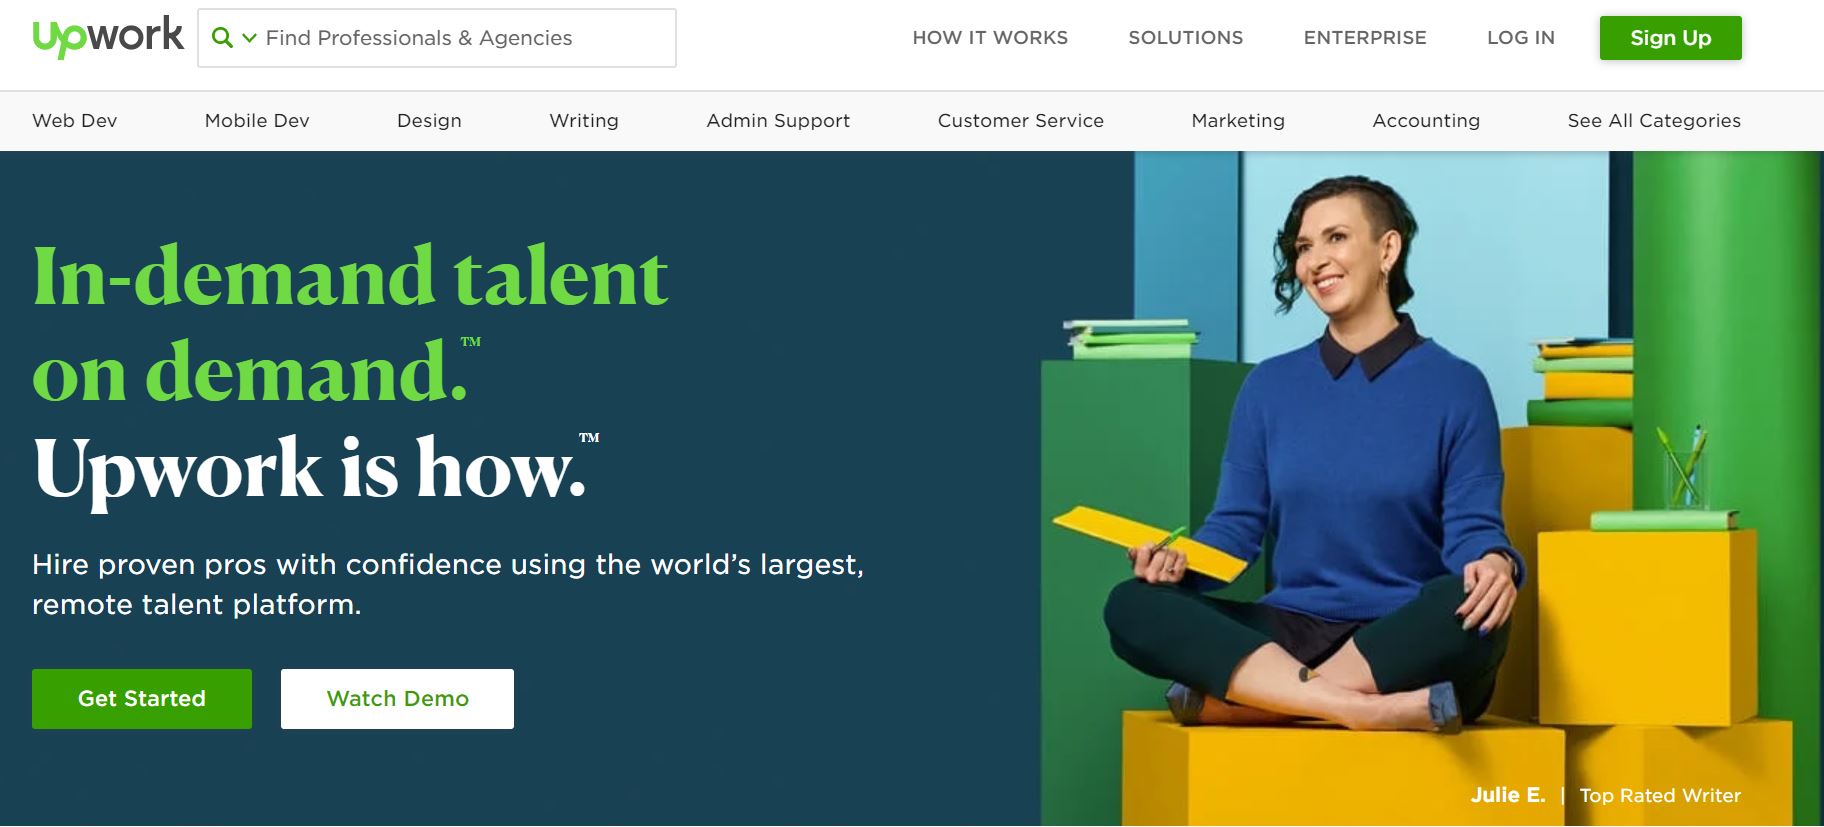 upwork outsourcing marketing talent